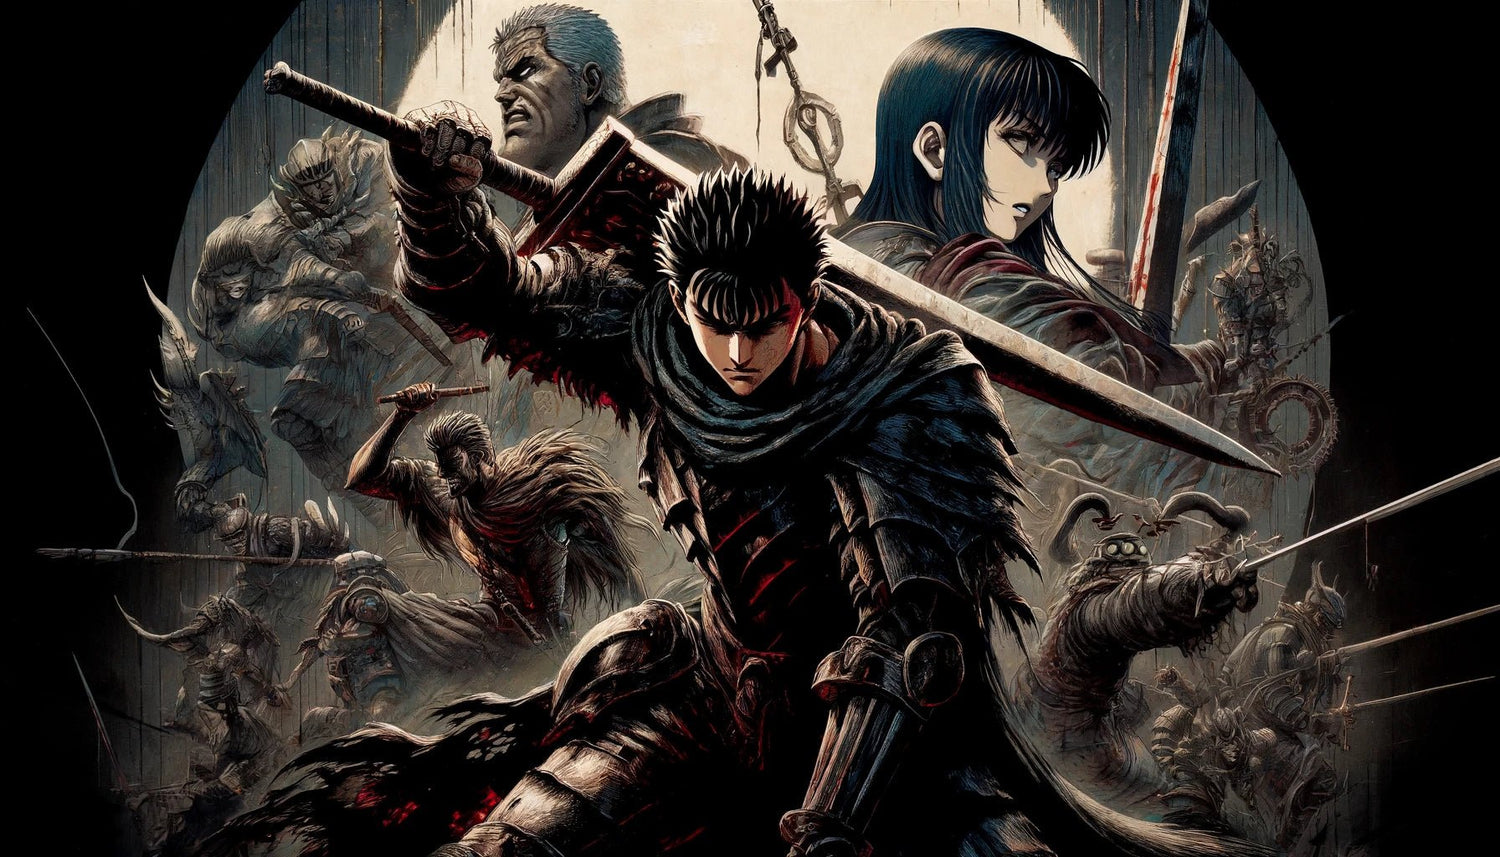 Is the Berserk Anime Good? Fans Share Their Thoughts - Seakoff